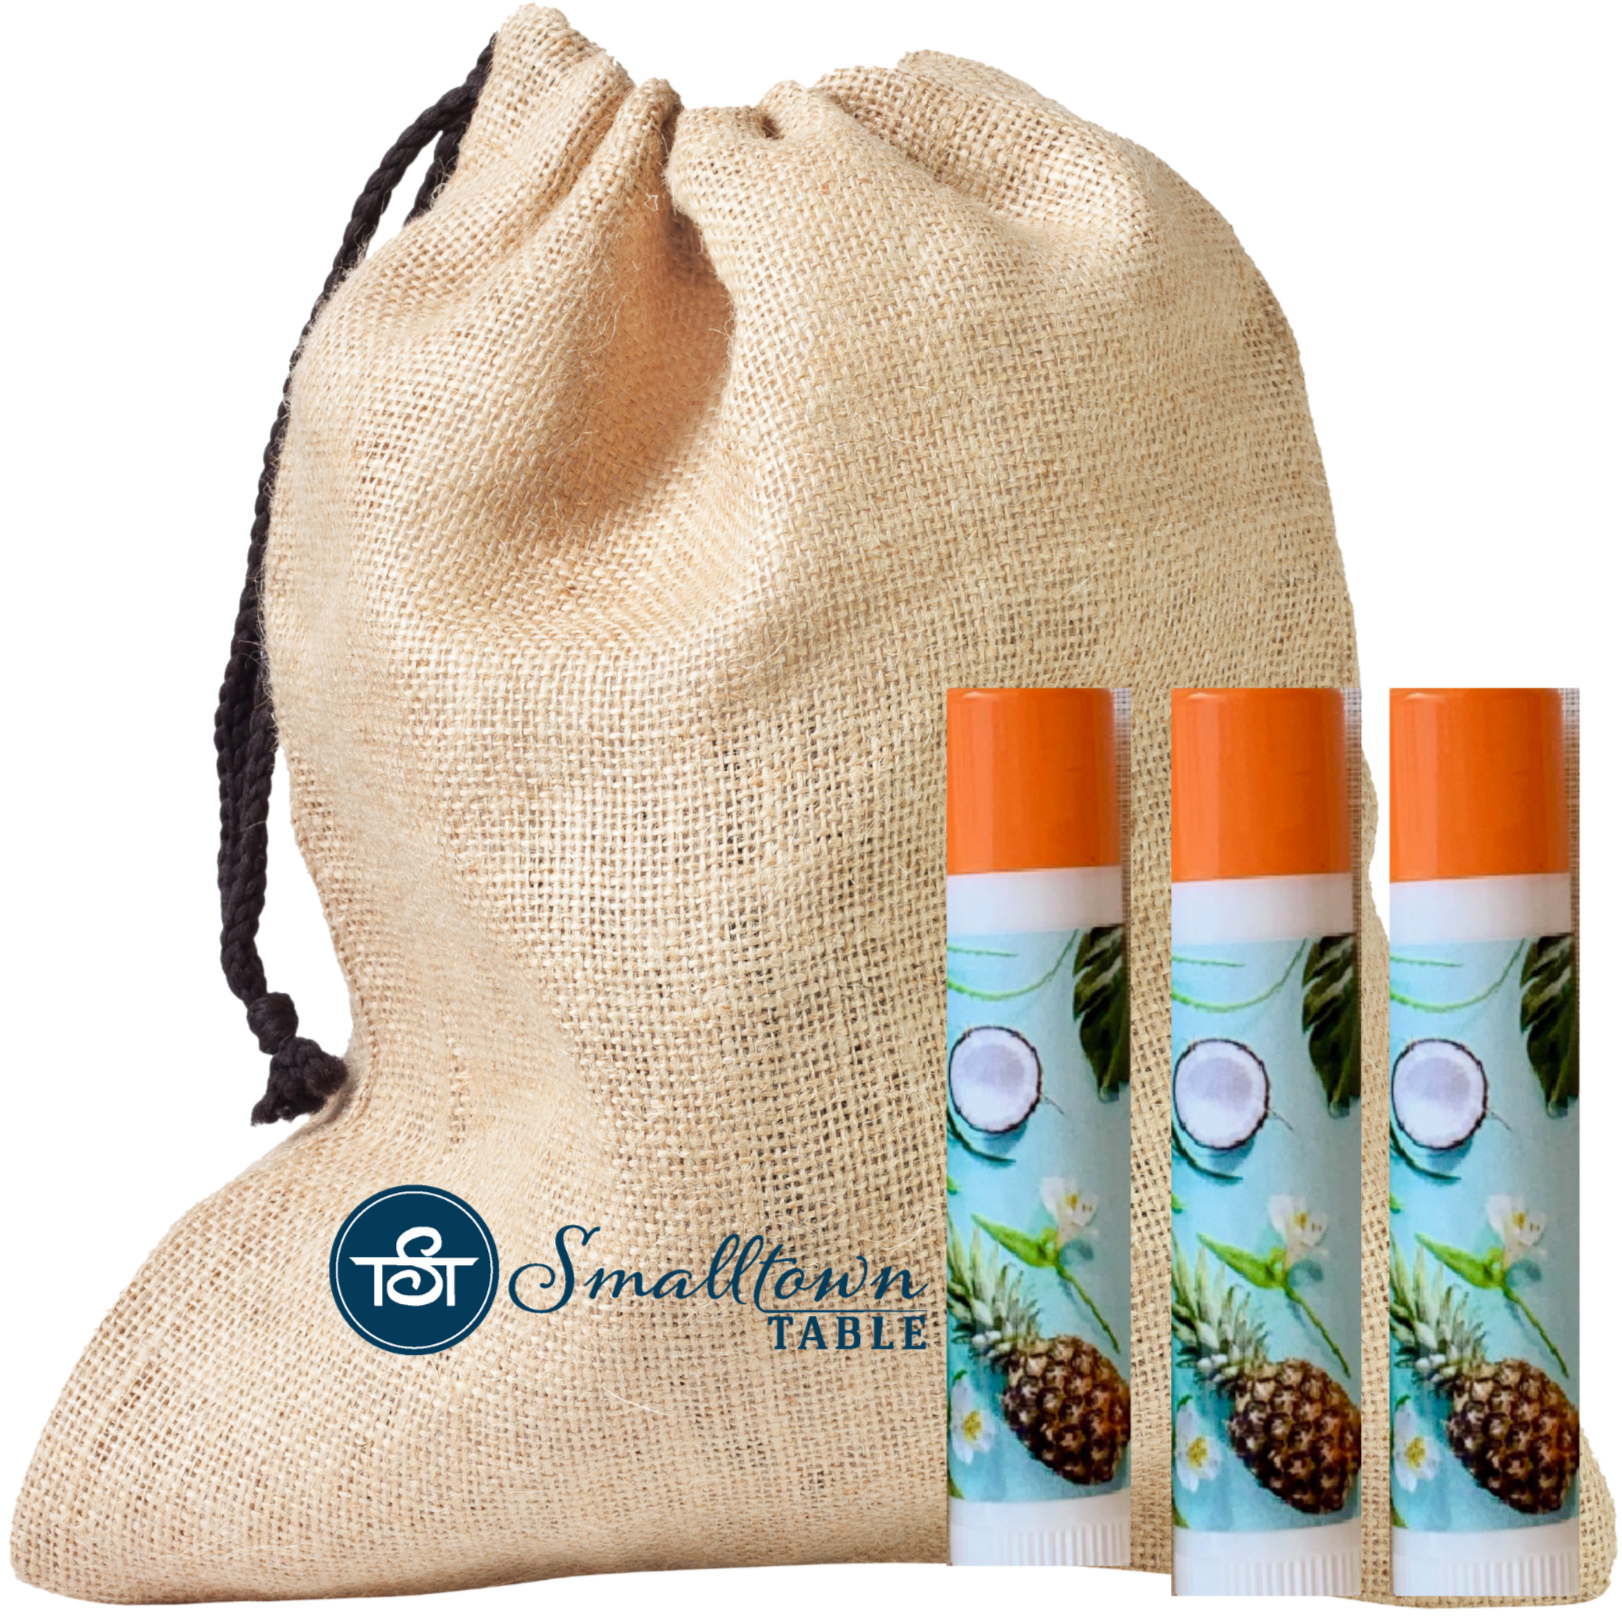 3 pack tropical coconut lip balm with sack stamped with smalltown table logo